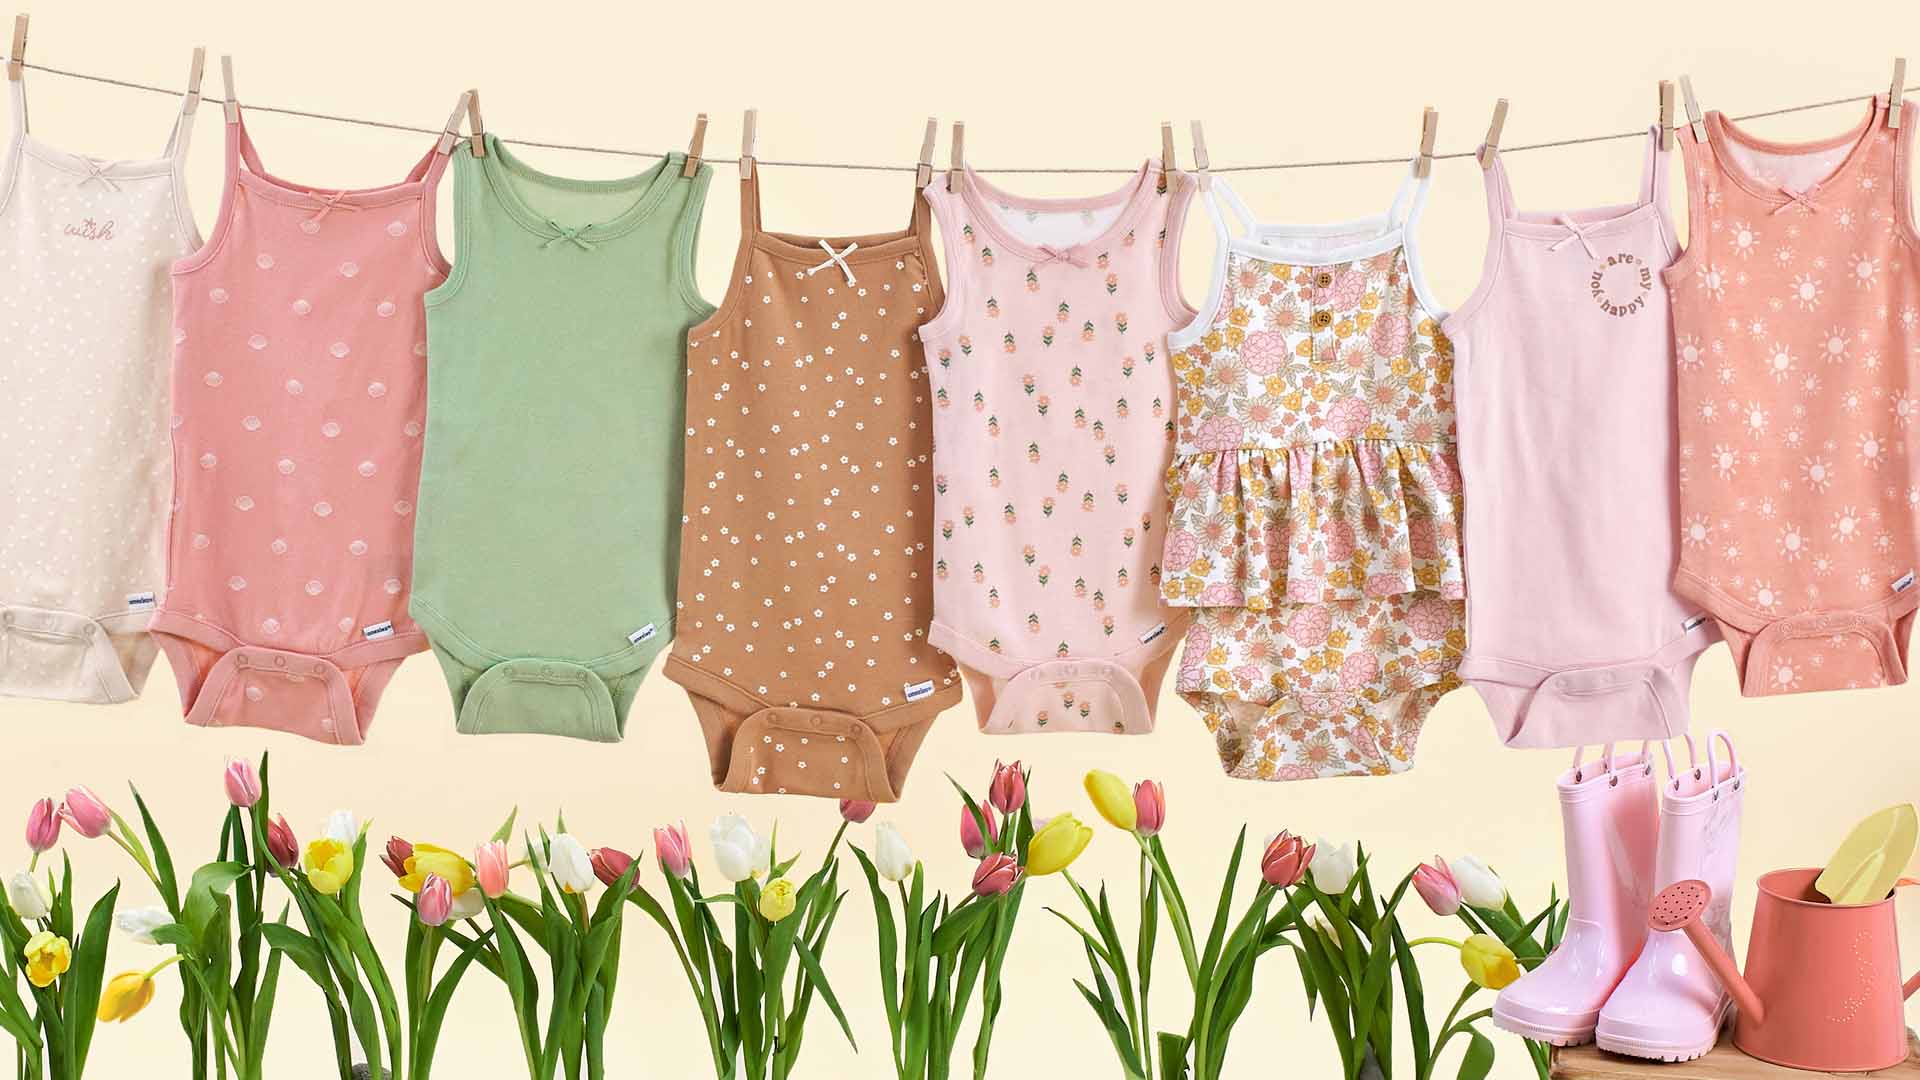 Baby girl tank top style bodysuits in spring colors hanging from a clothesline.